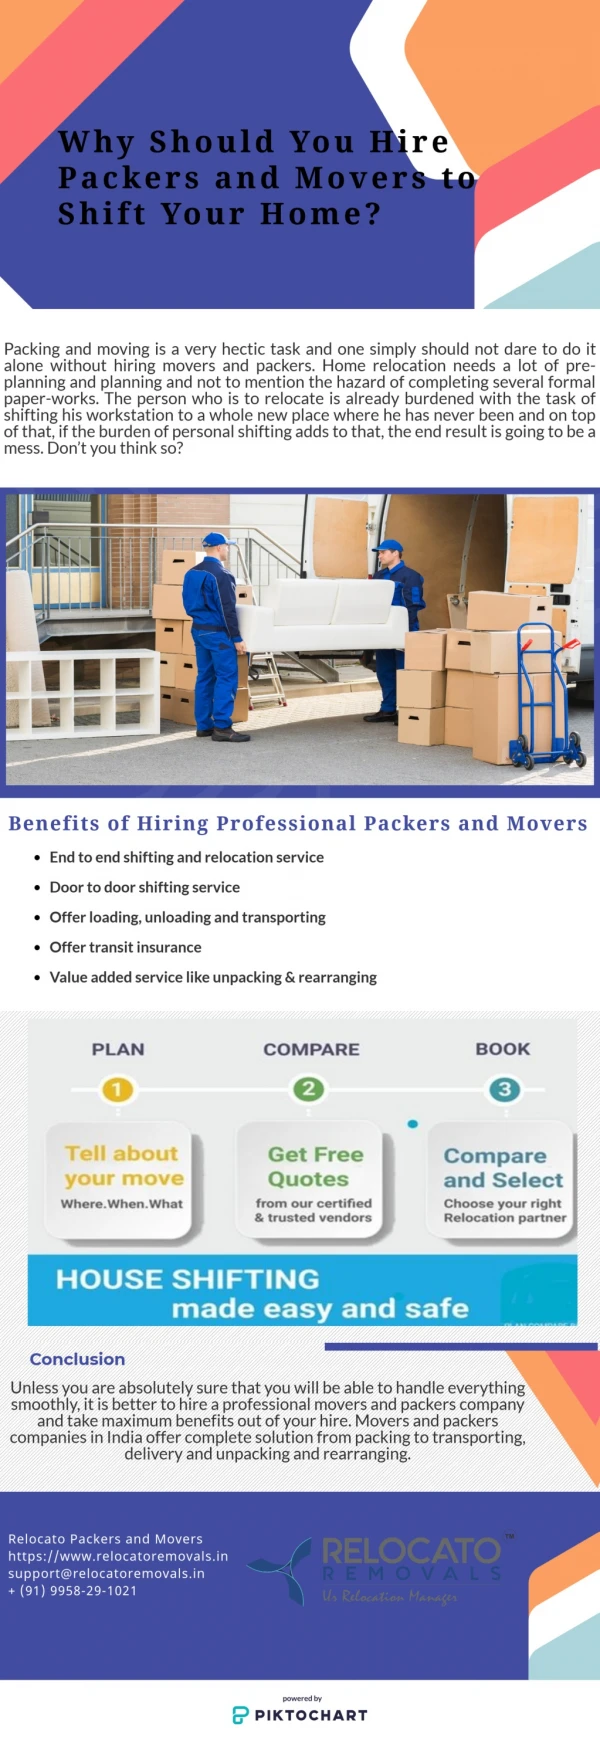 Why Should You Hire Packers and Movers to Shift Your Home?